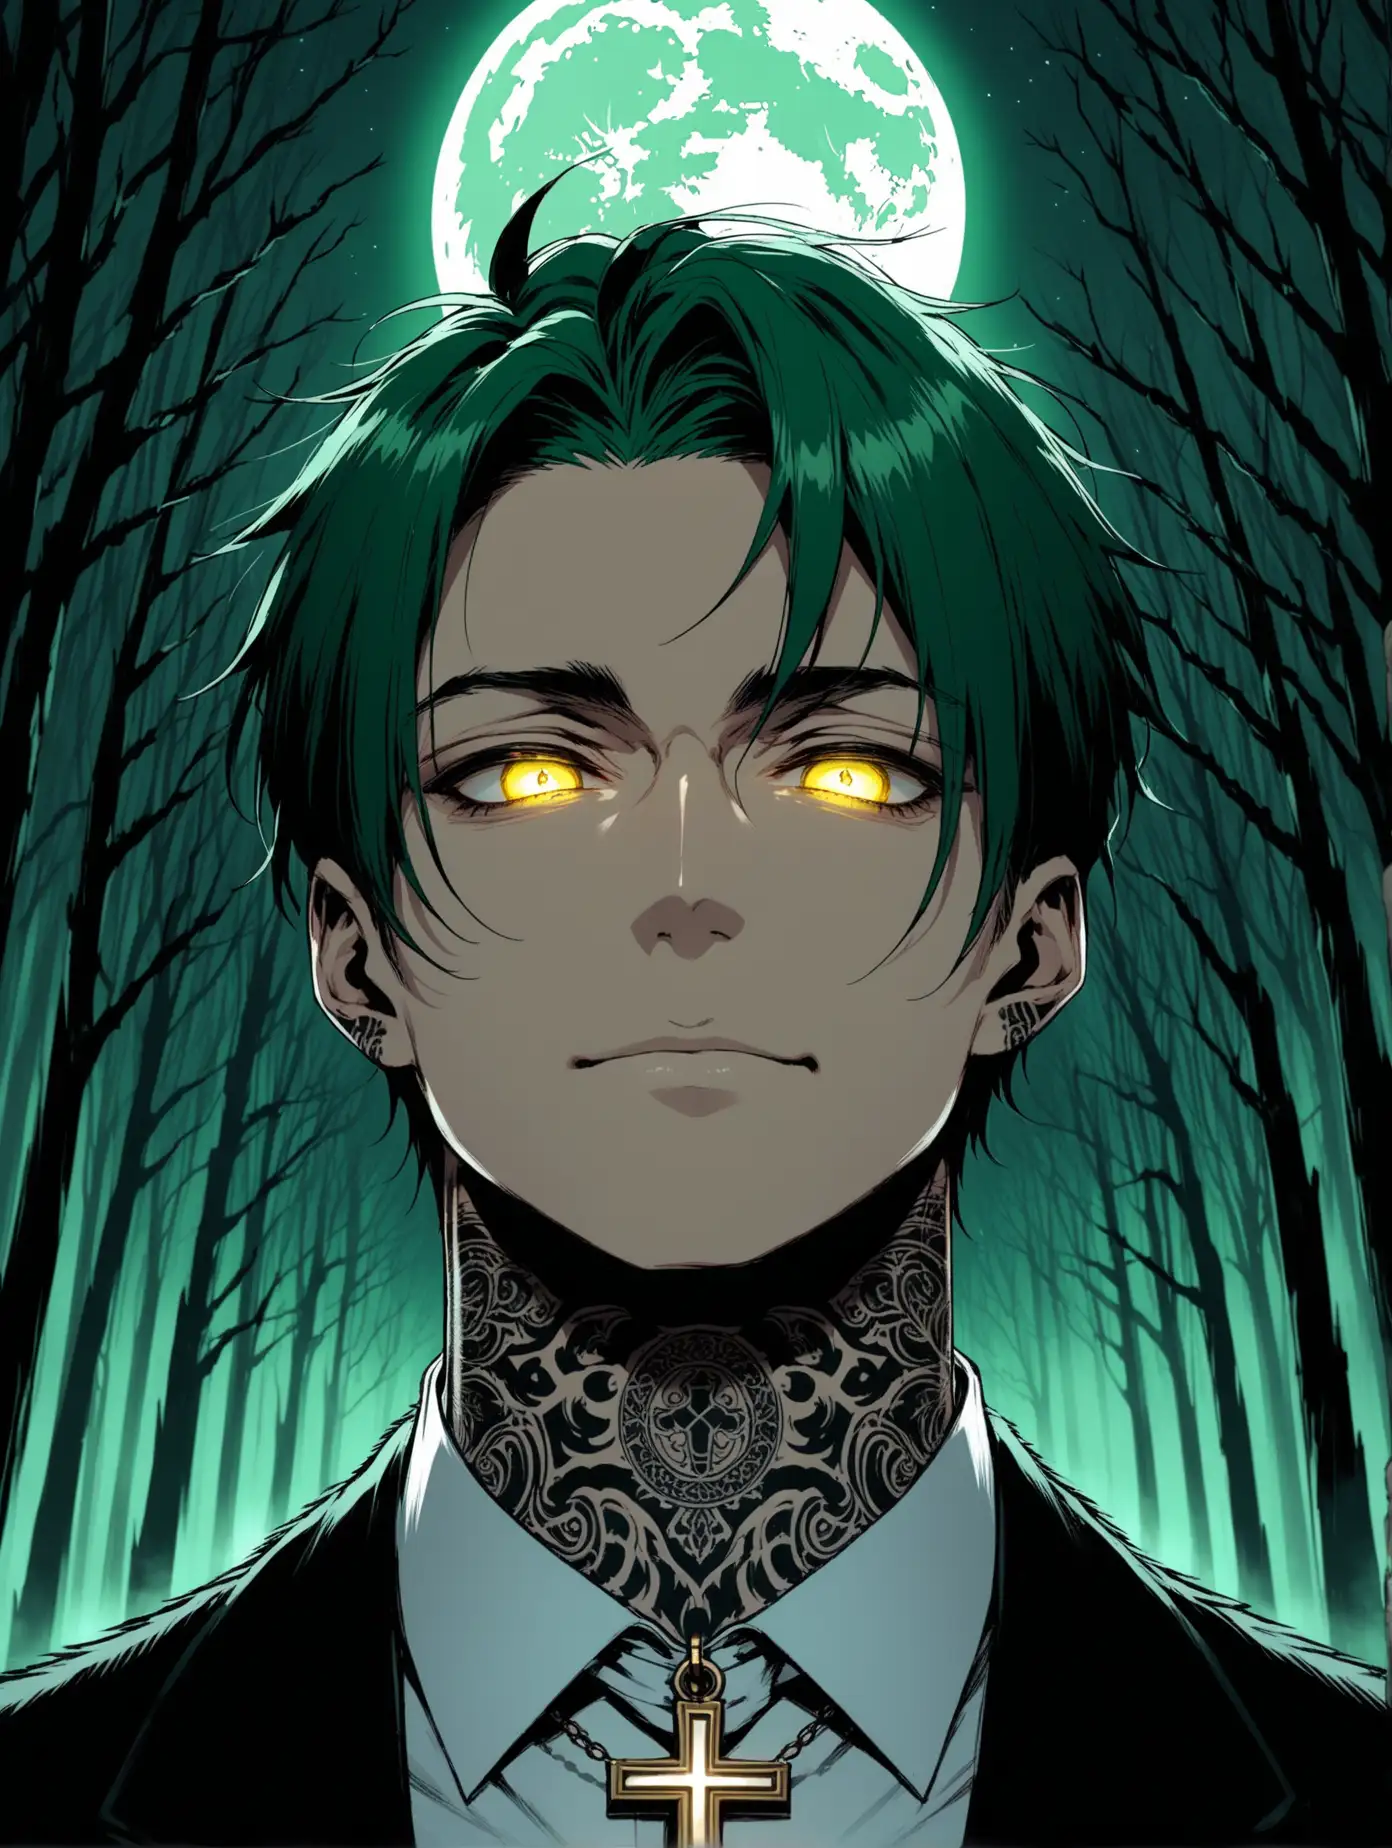 Mysterious-Man-with-Green-Hair-and-Cross-Pendant-in-Moonlit-Graveyard